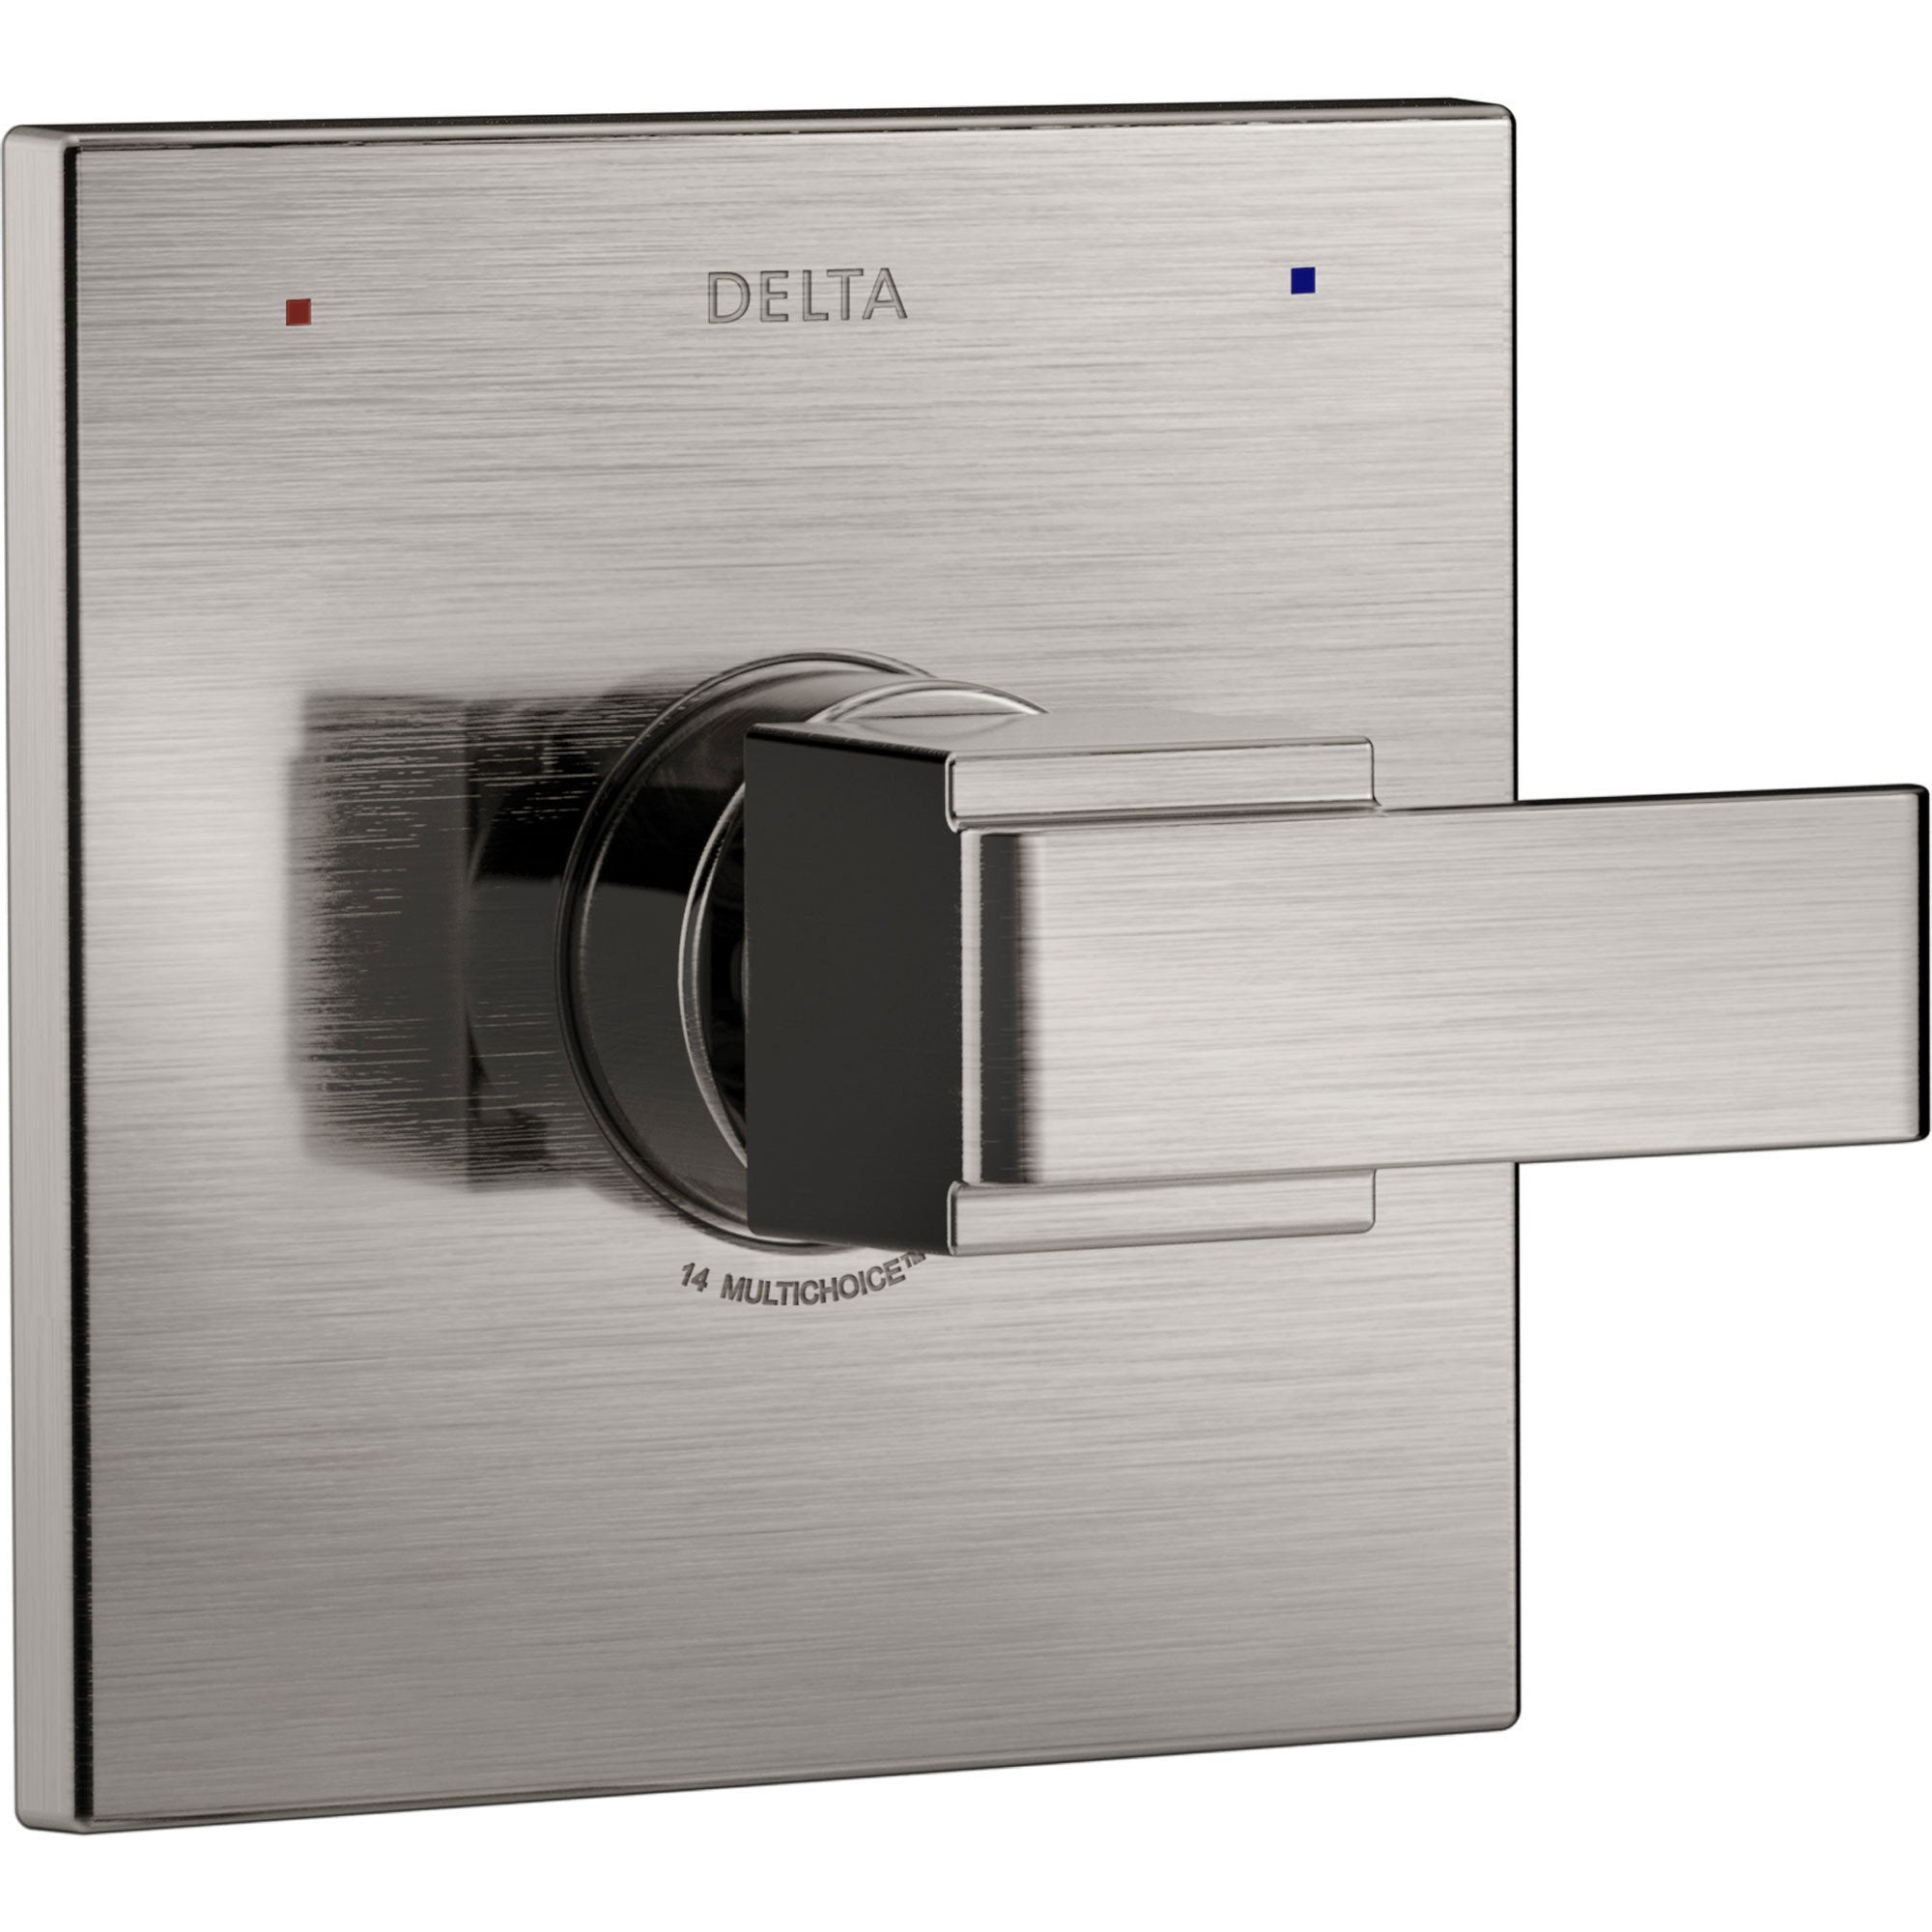 Delta Ara Modern Monitor 14 Series Stainless Steel Finish Square Single Handle Pressure Balanced Shower Faucet Control INCLUDES Rough-in Valve D1252V